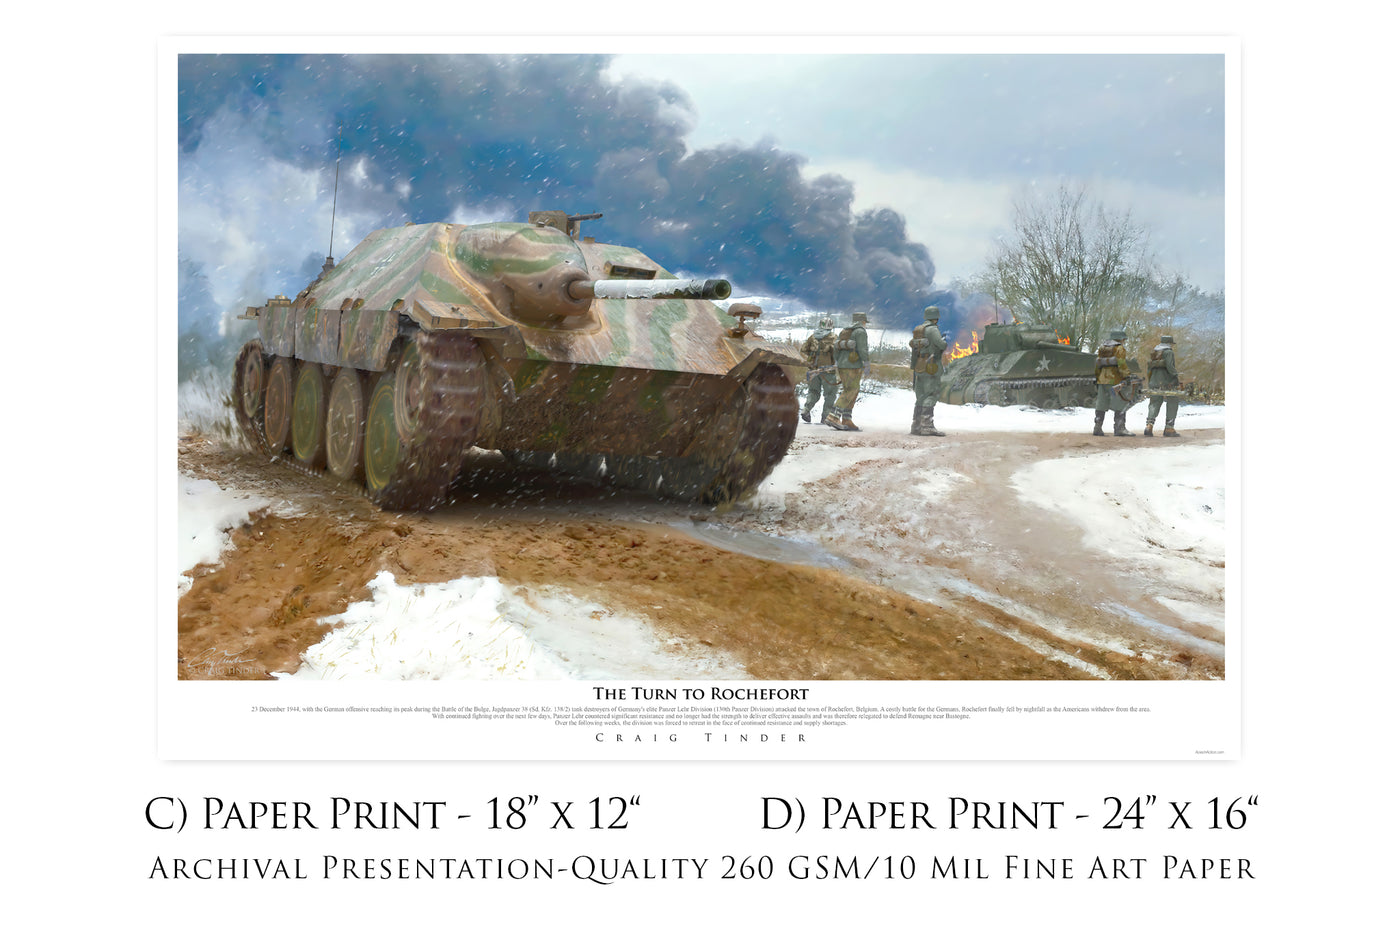 The Turn to Rochefort - Jagdpanzer 38 Hetzer Tank Military Art-Art Print-Aces In Action: The Workshop of Artist Craig Tinder